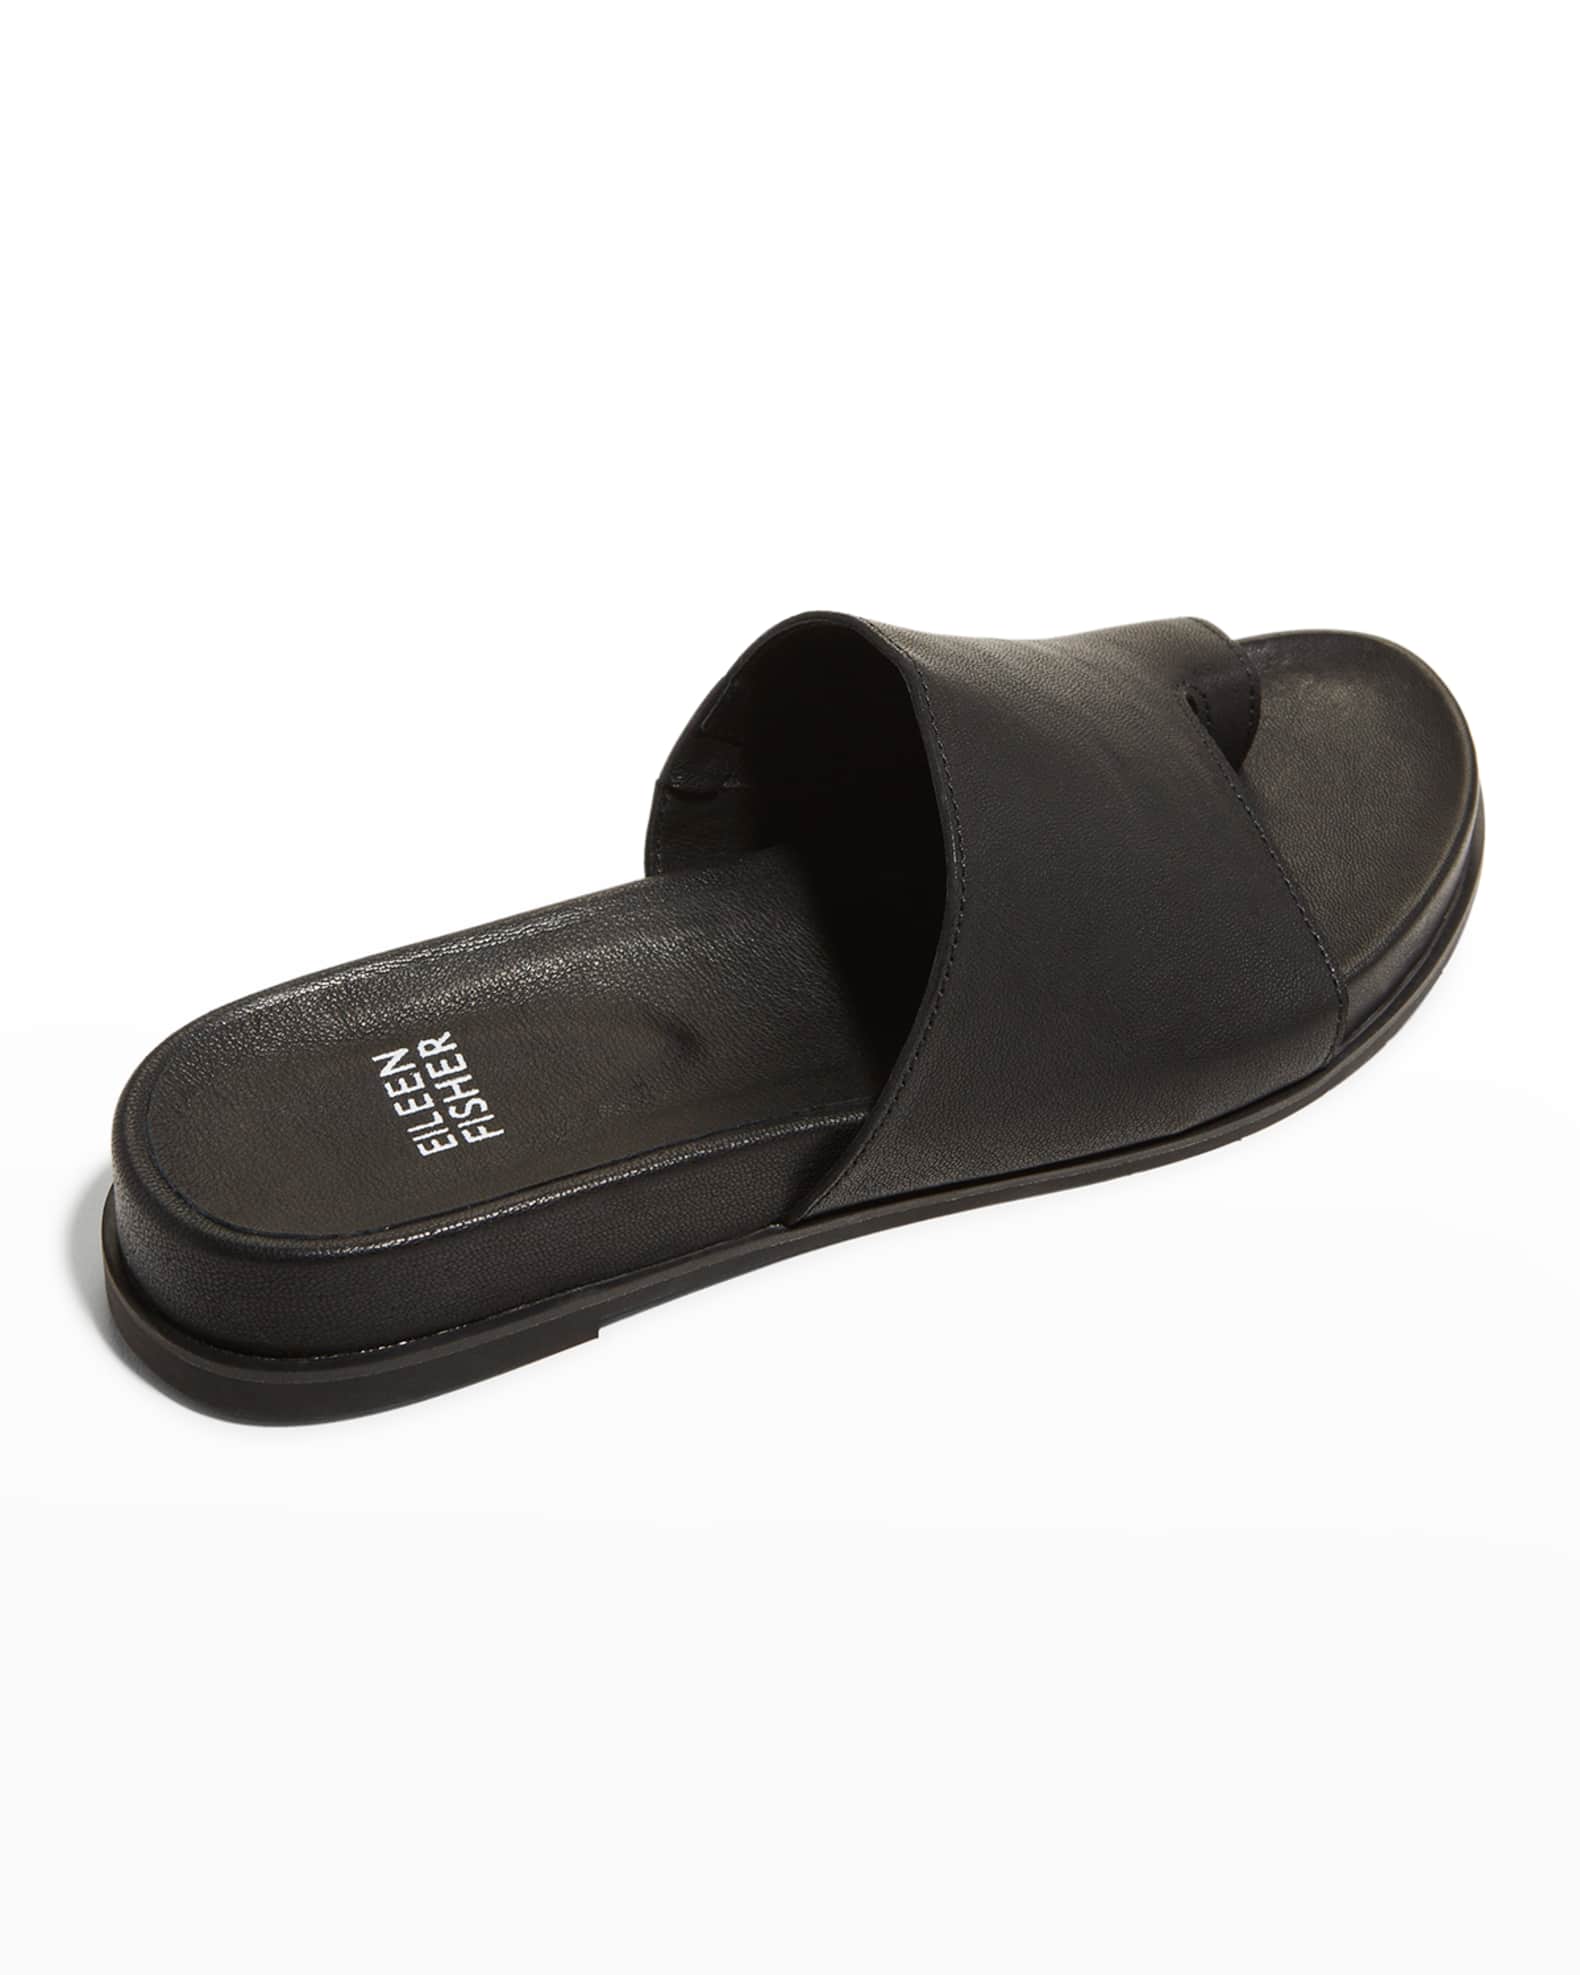 Eileen Fisher Leather Toe-Ring Slide Sandals | Neiman Marcus